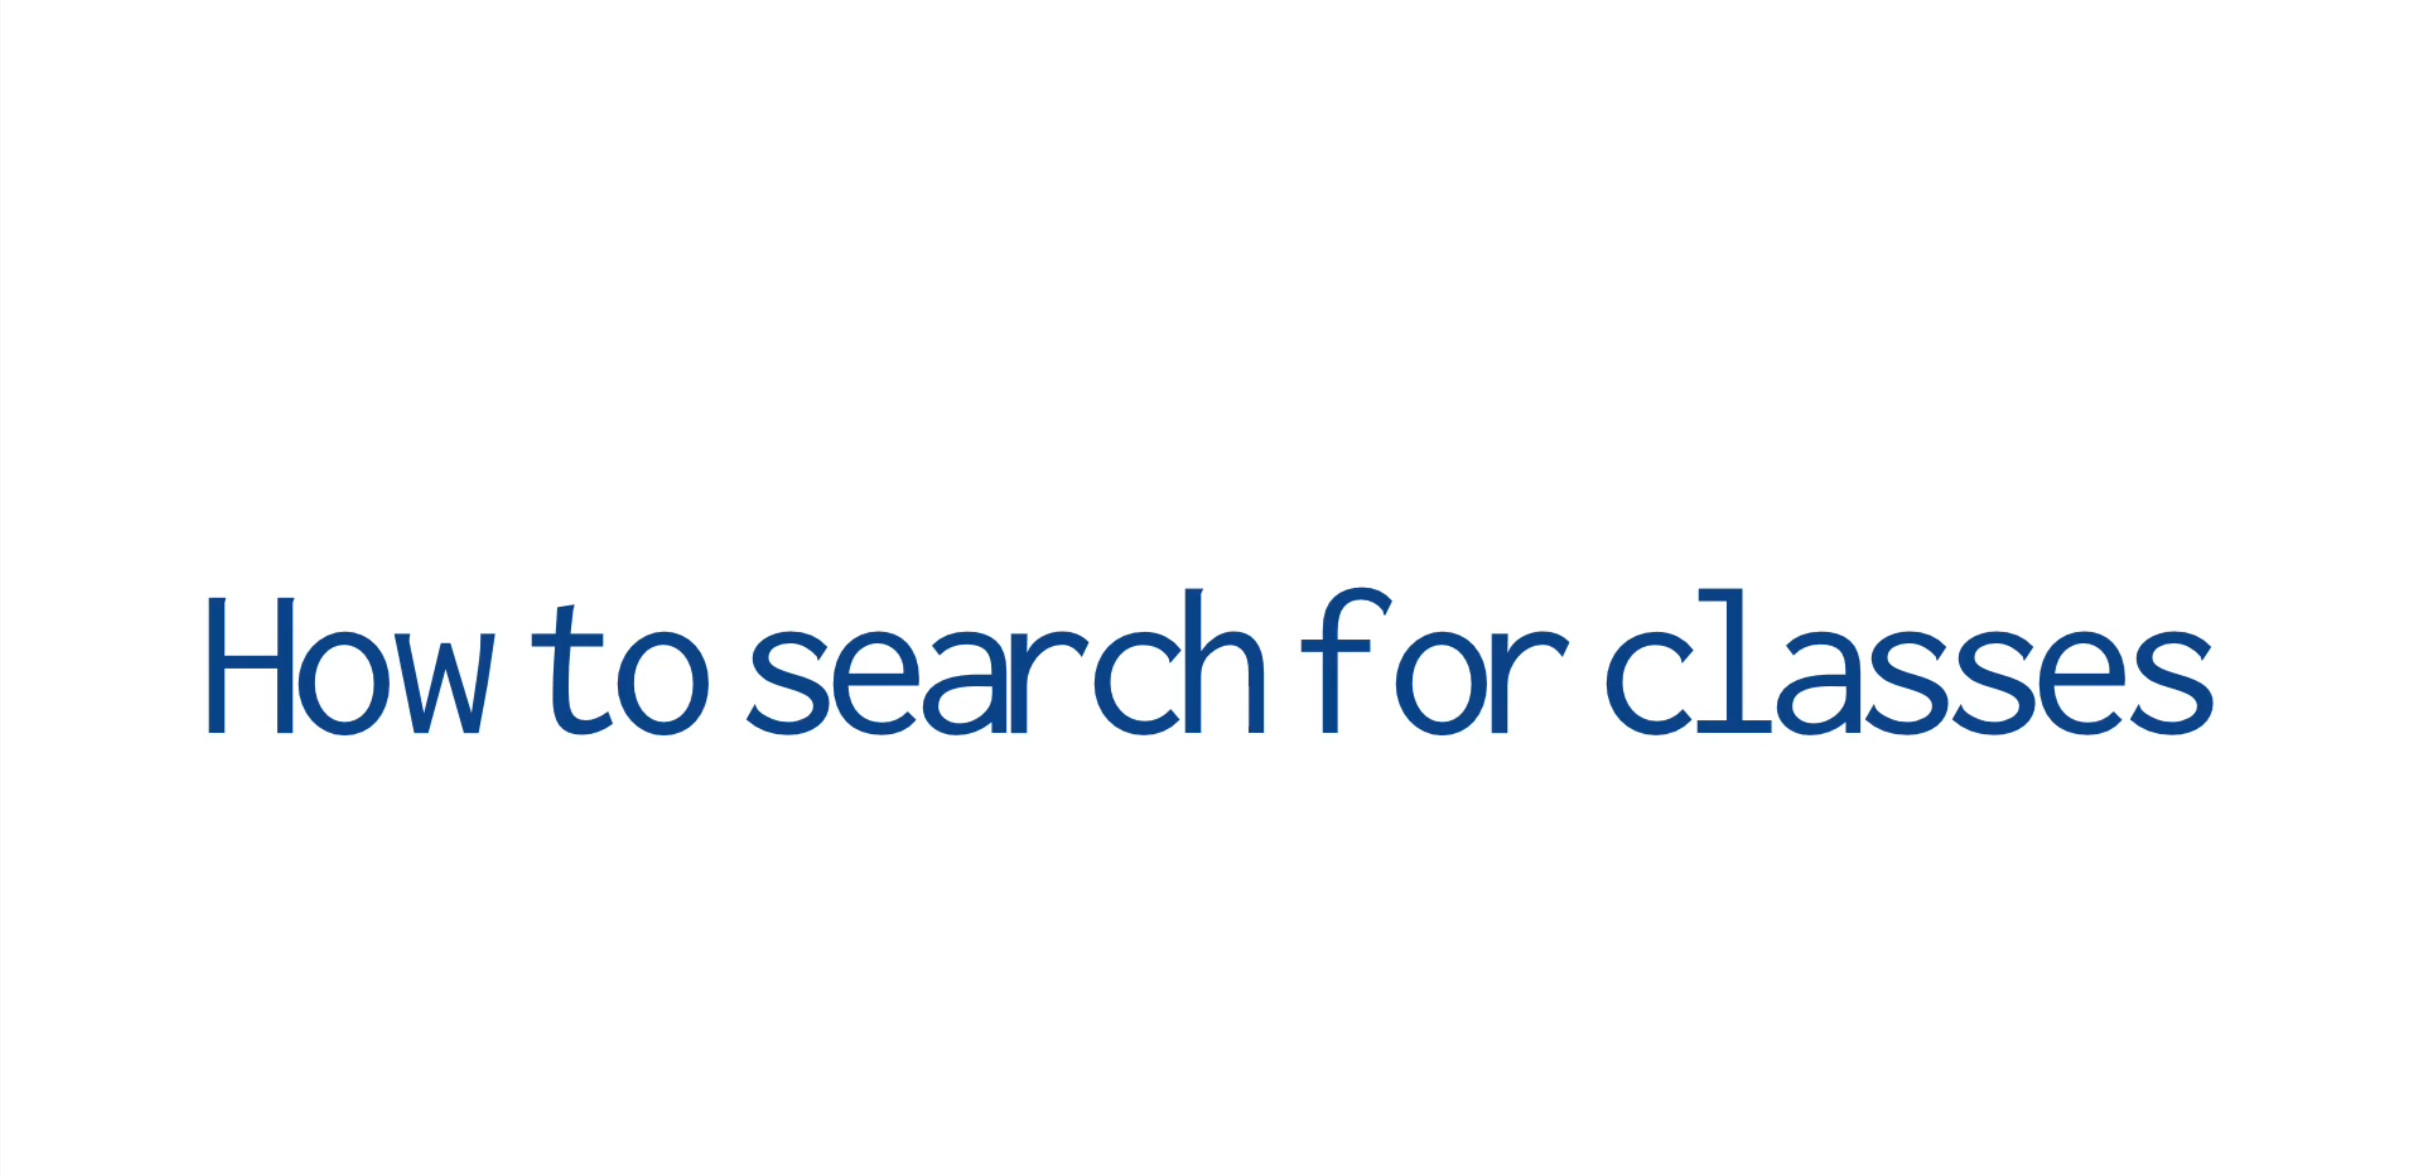 How to Search for Classes